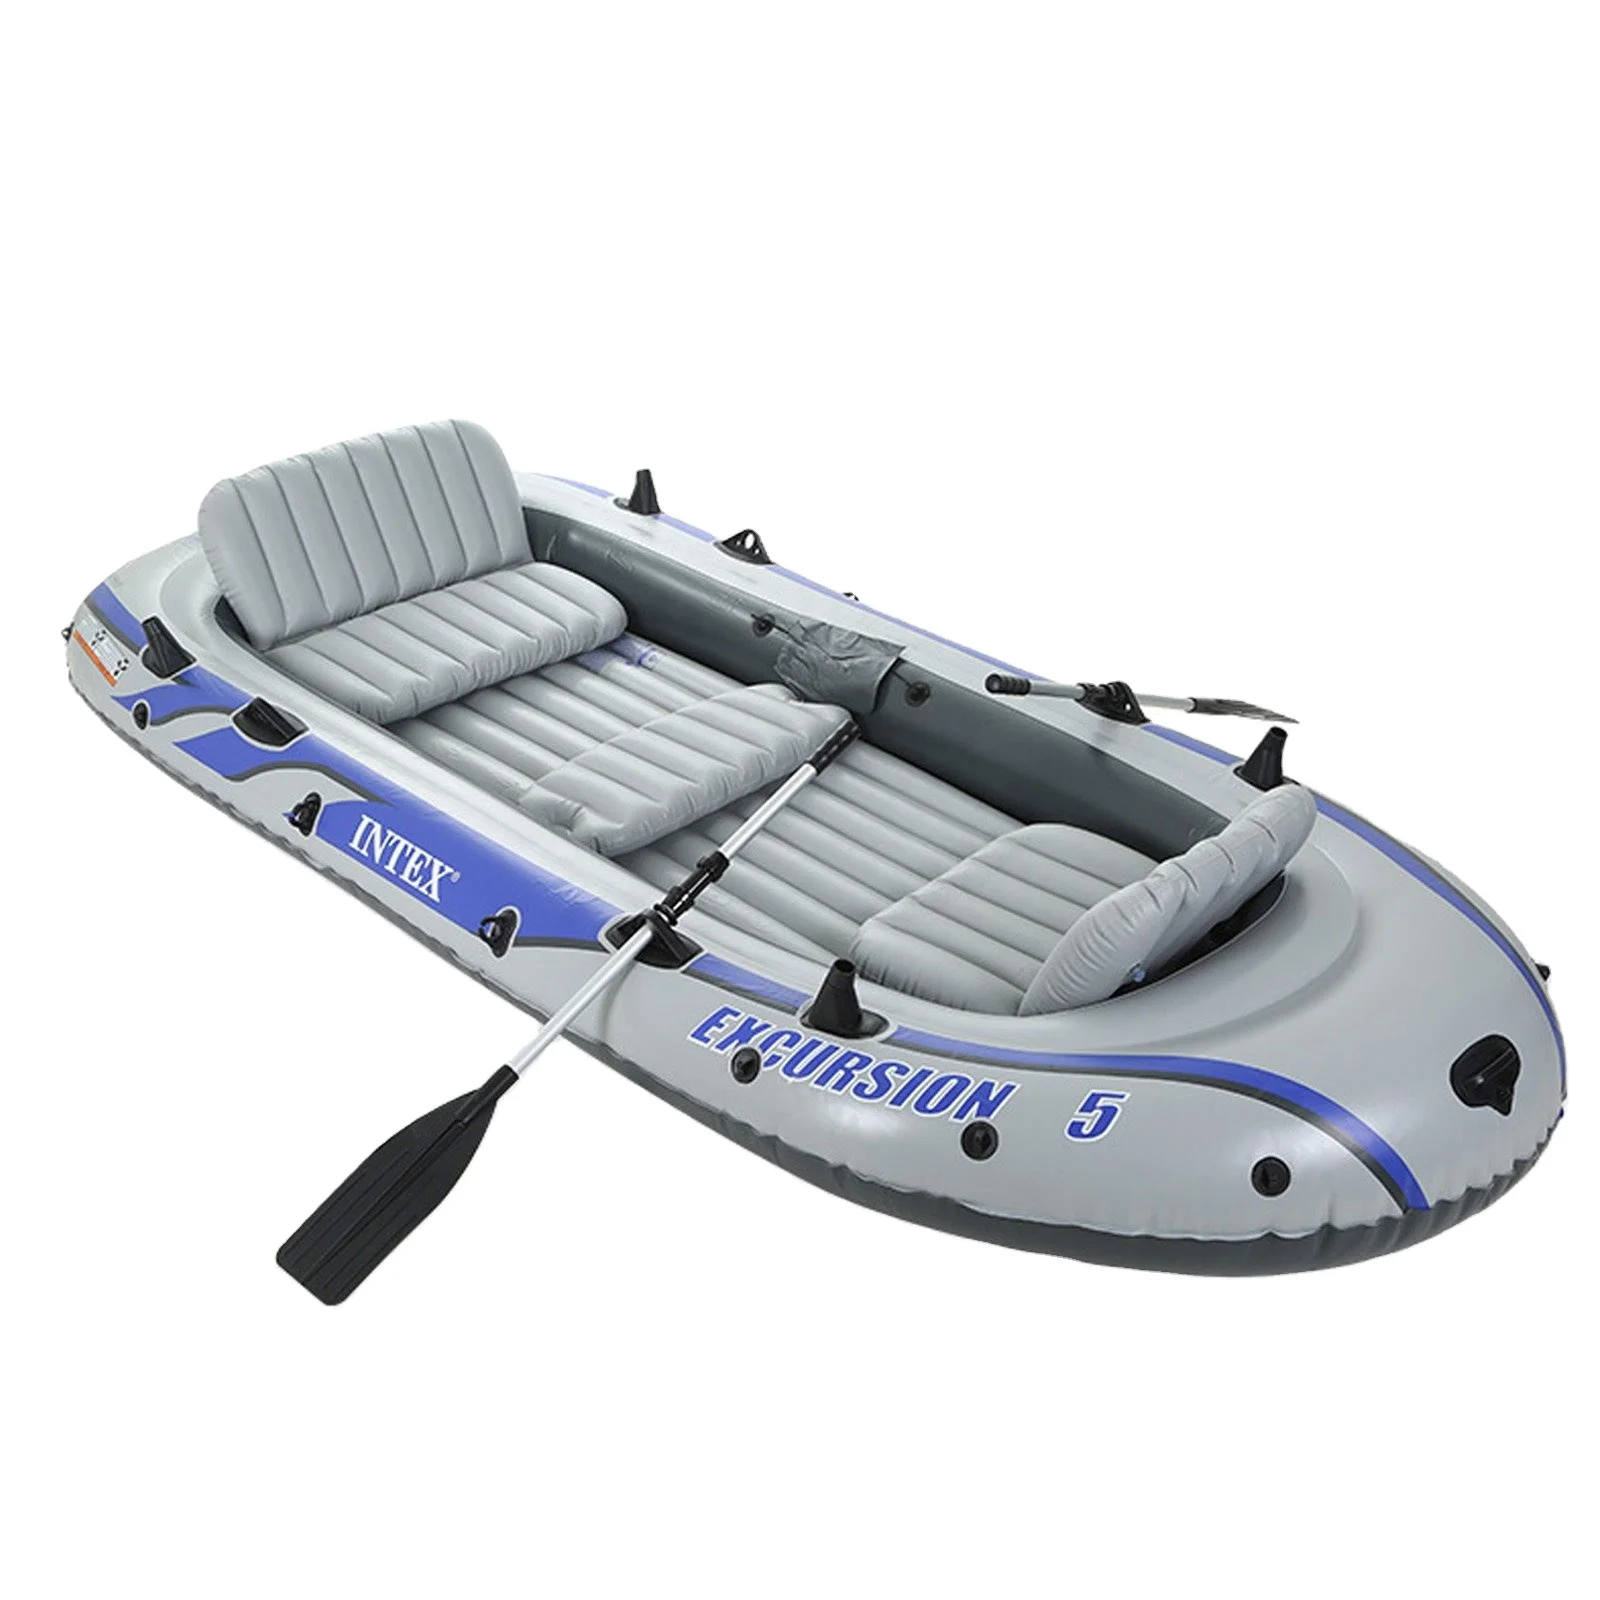 

Excursion 5 Boat Five Person 68325 Inflatable Rowing Boats PVC Kayak Color Box Packing Set With Pump Oars Bag